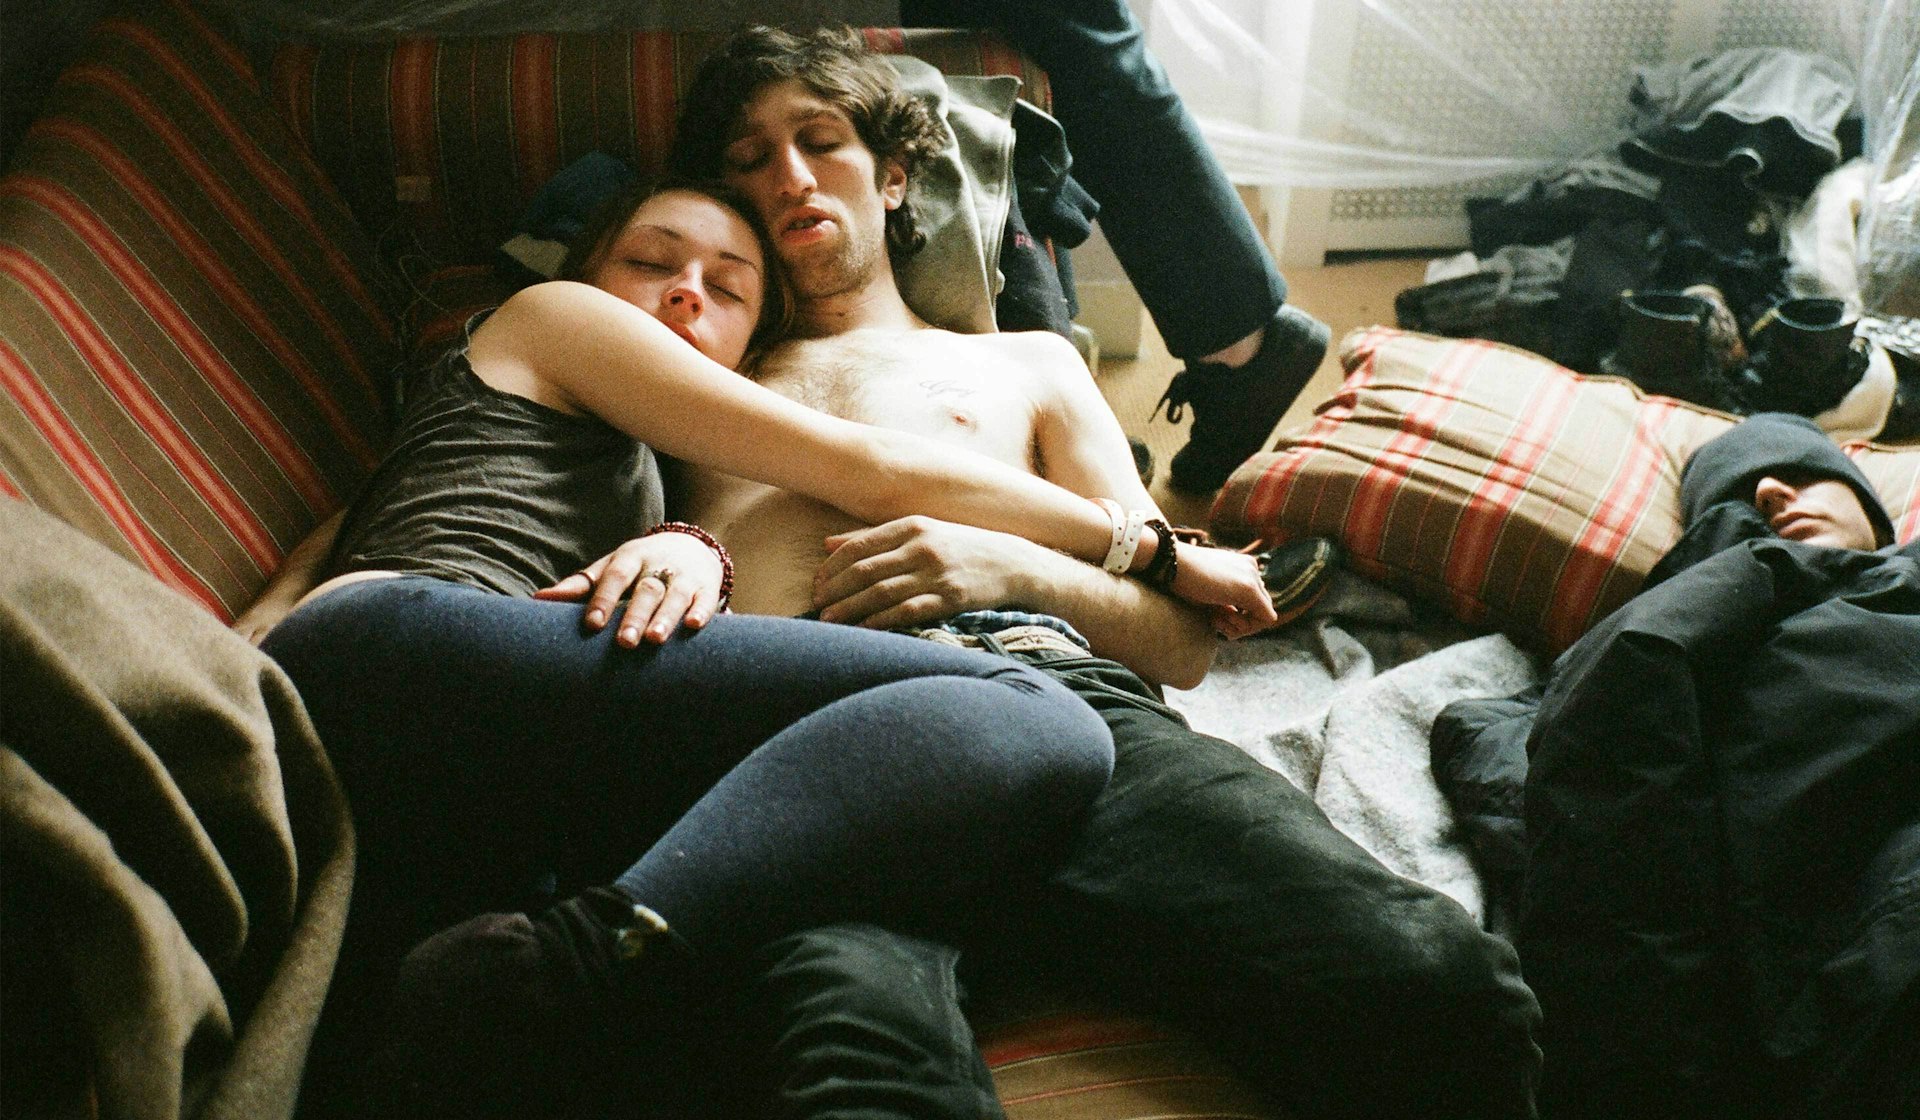 Love and heroin addiction in NYC laid bare in Heaven Knows What